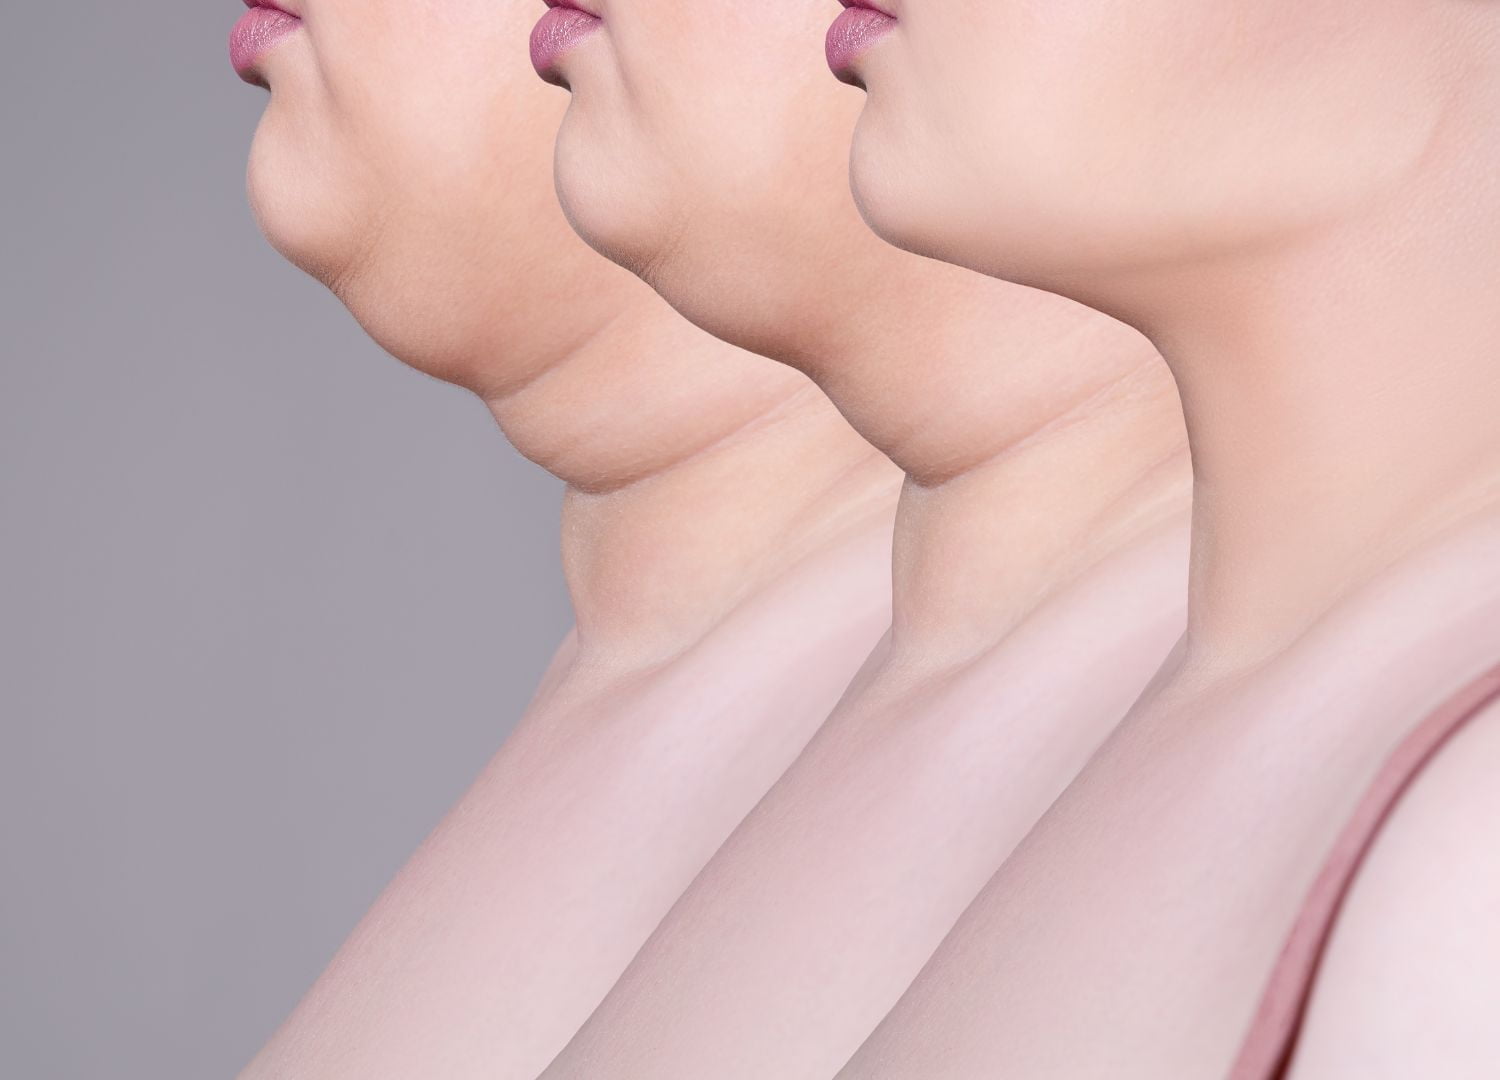 Let's find out the cause of double chin and how HIFU can treat it